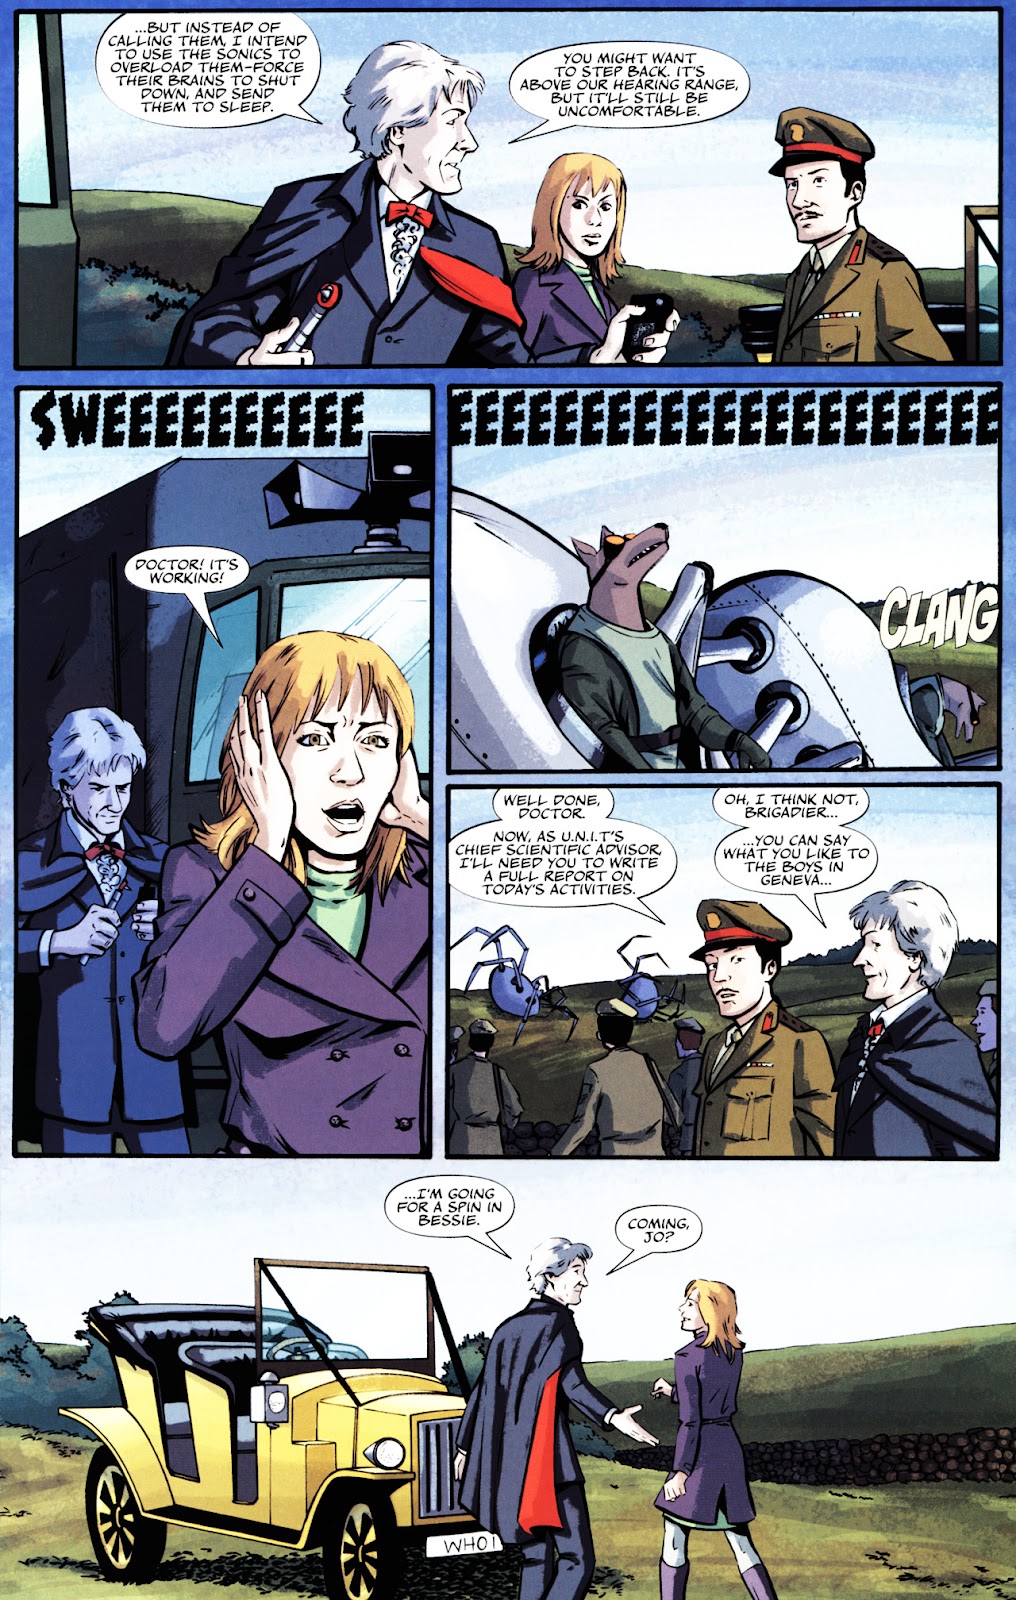 Doctor Who: The Forgotten issue 2 - Page 20